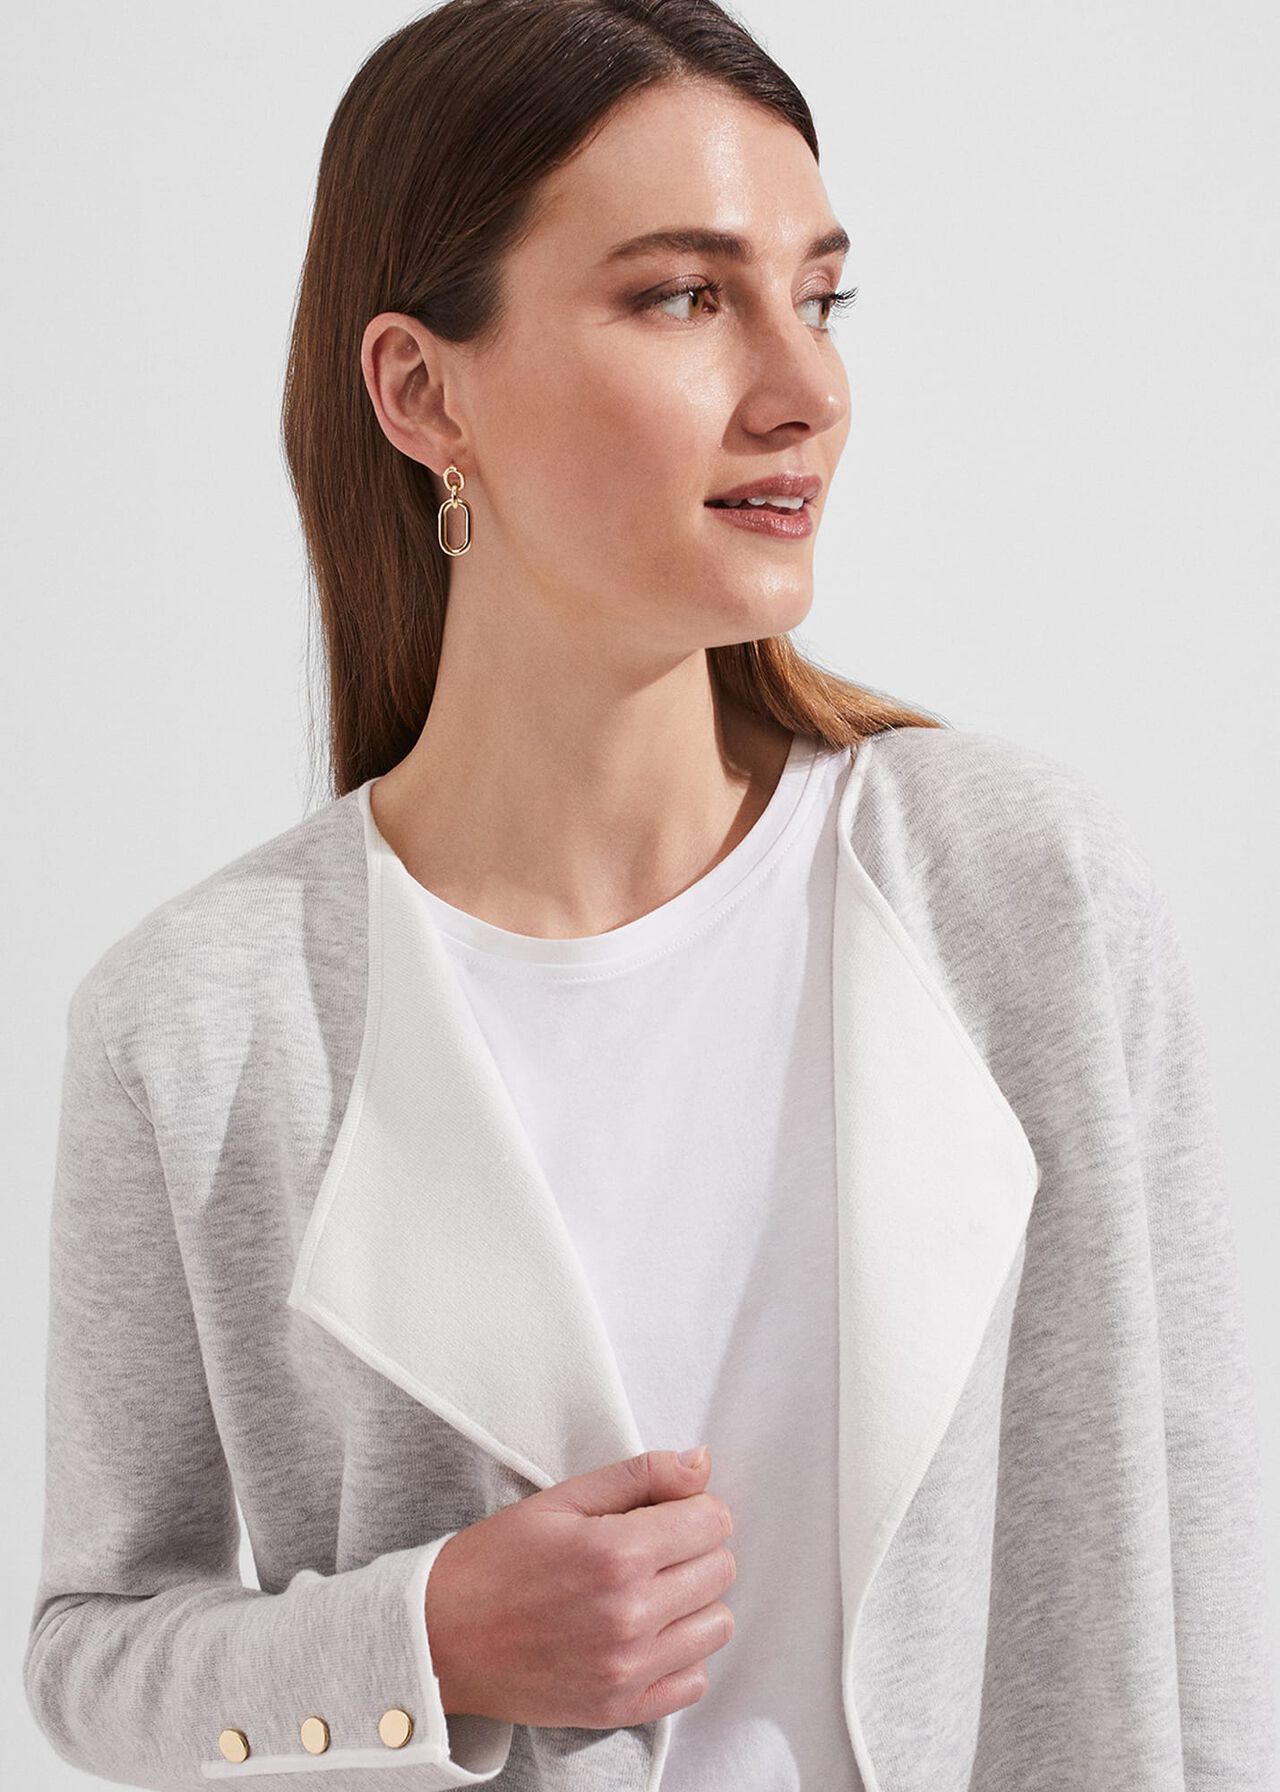 Darcy Knitted Jacket , Grey Ivory, hi-res